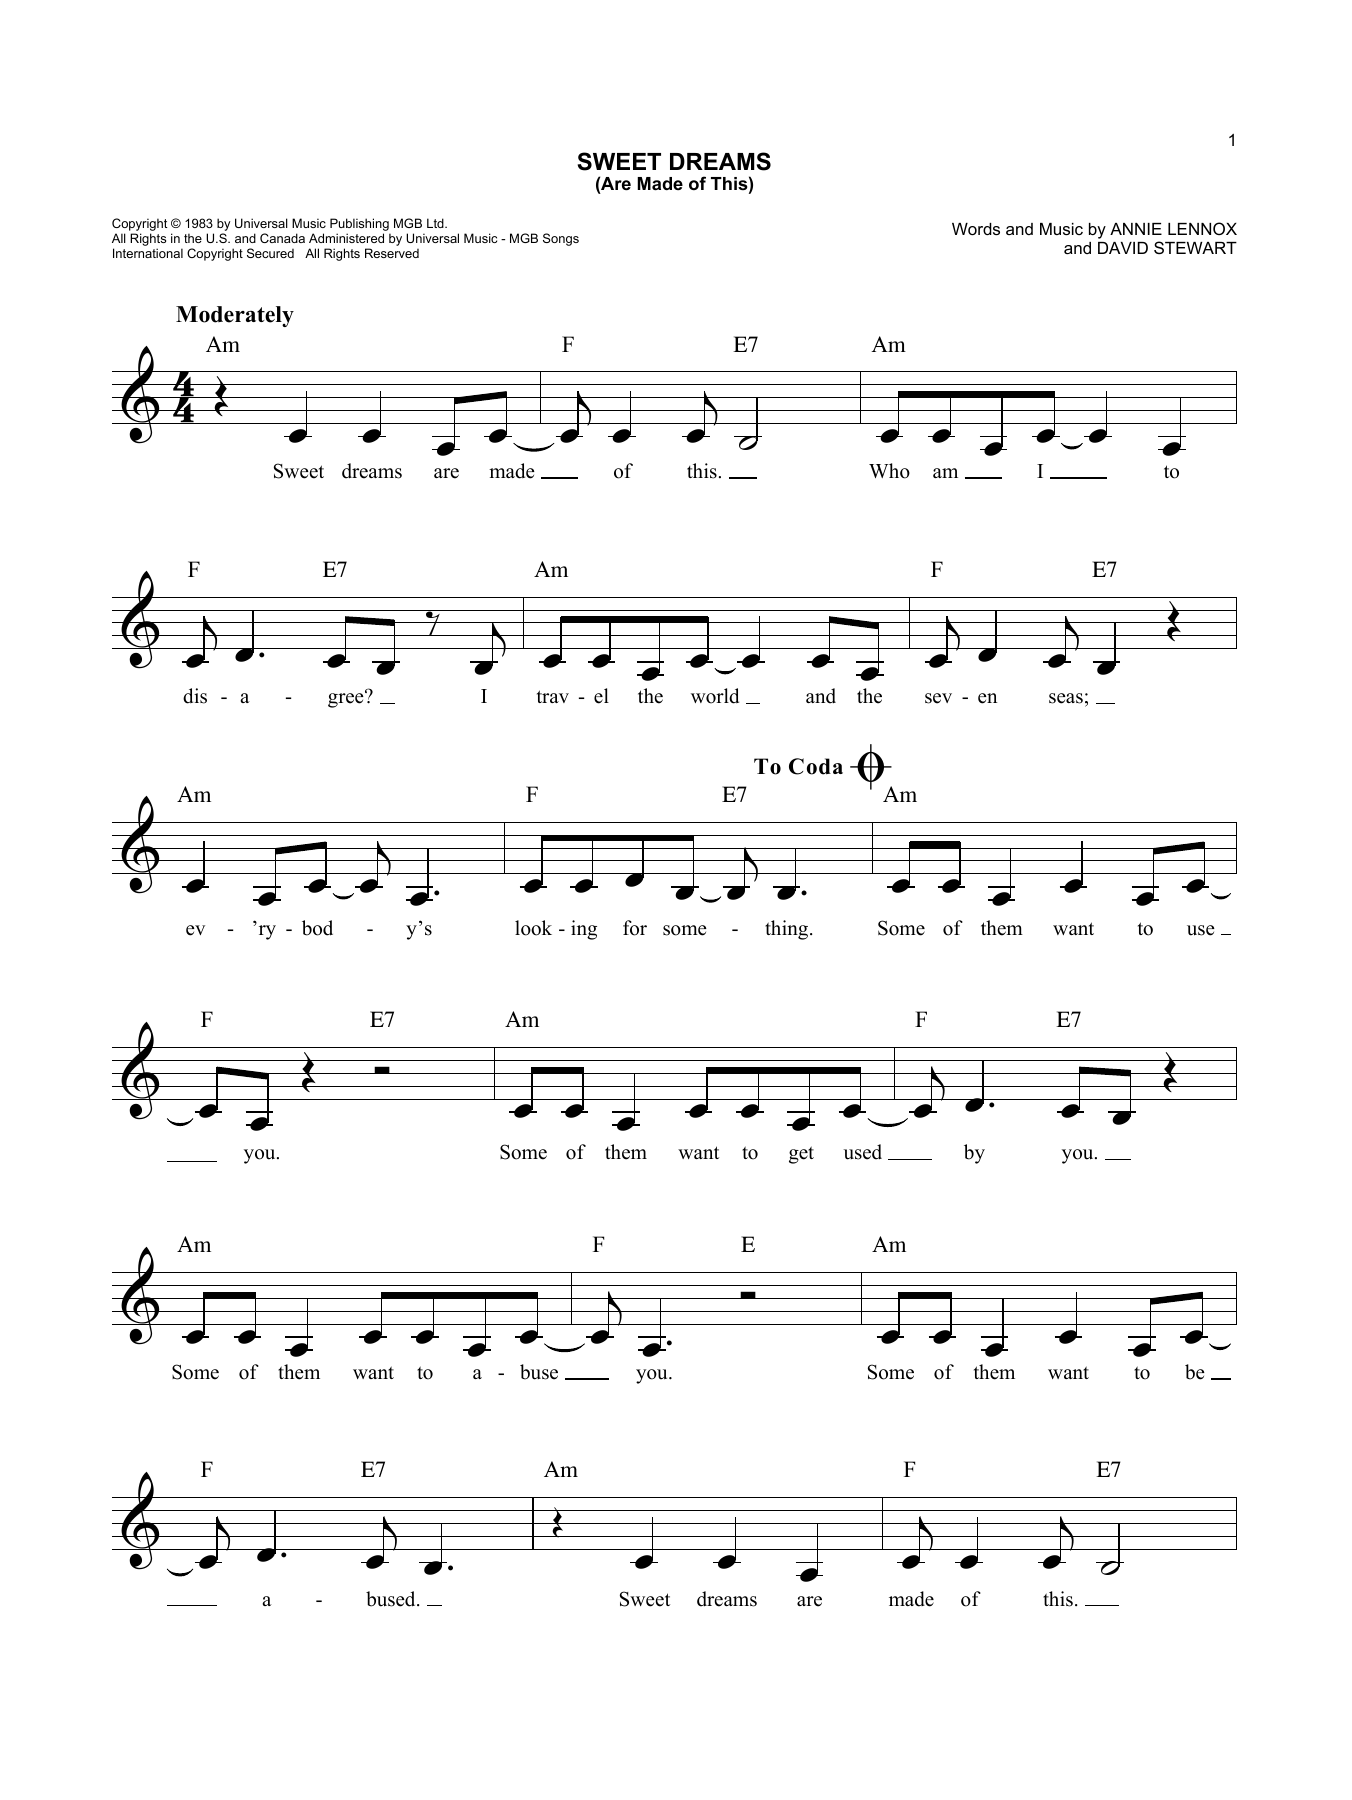 Download Eurythmics Sweet Dreams (Are Made Of This) Sheet Music